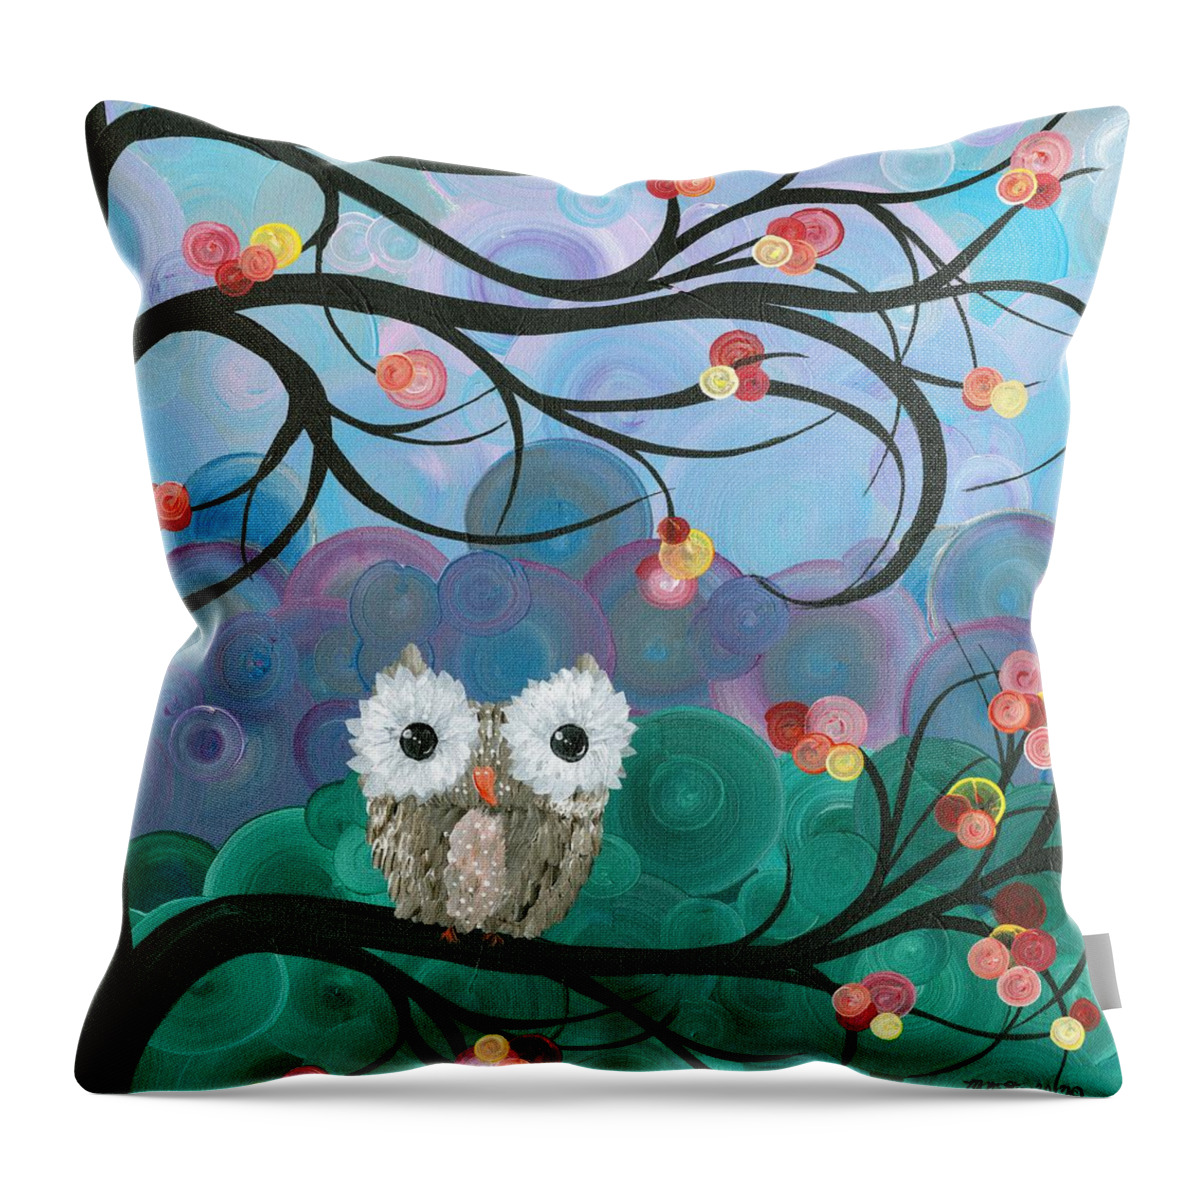 Owls Throw Pillow featuring the painting Owl Expressions - 03 by MiMi Stirn